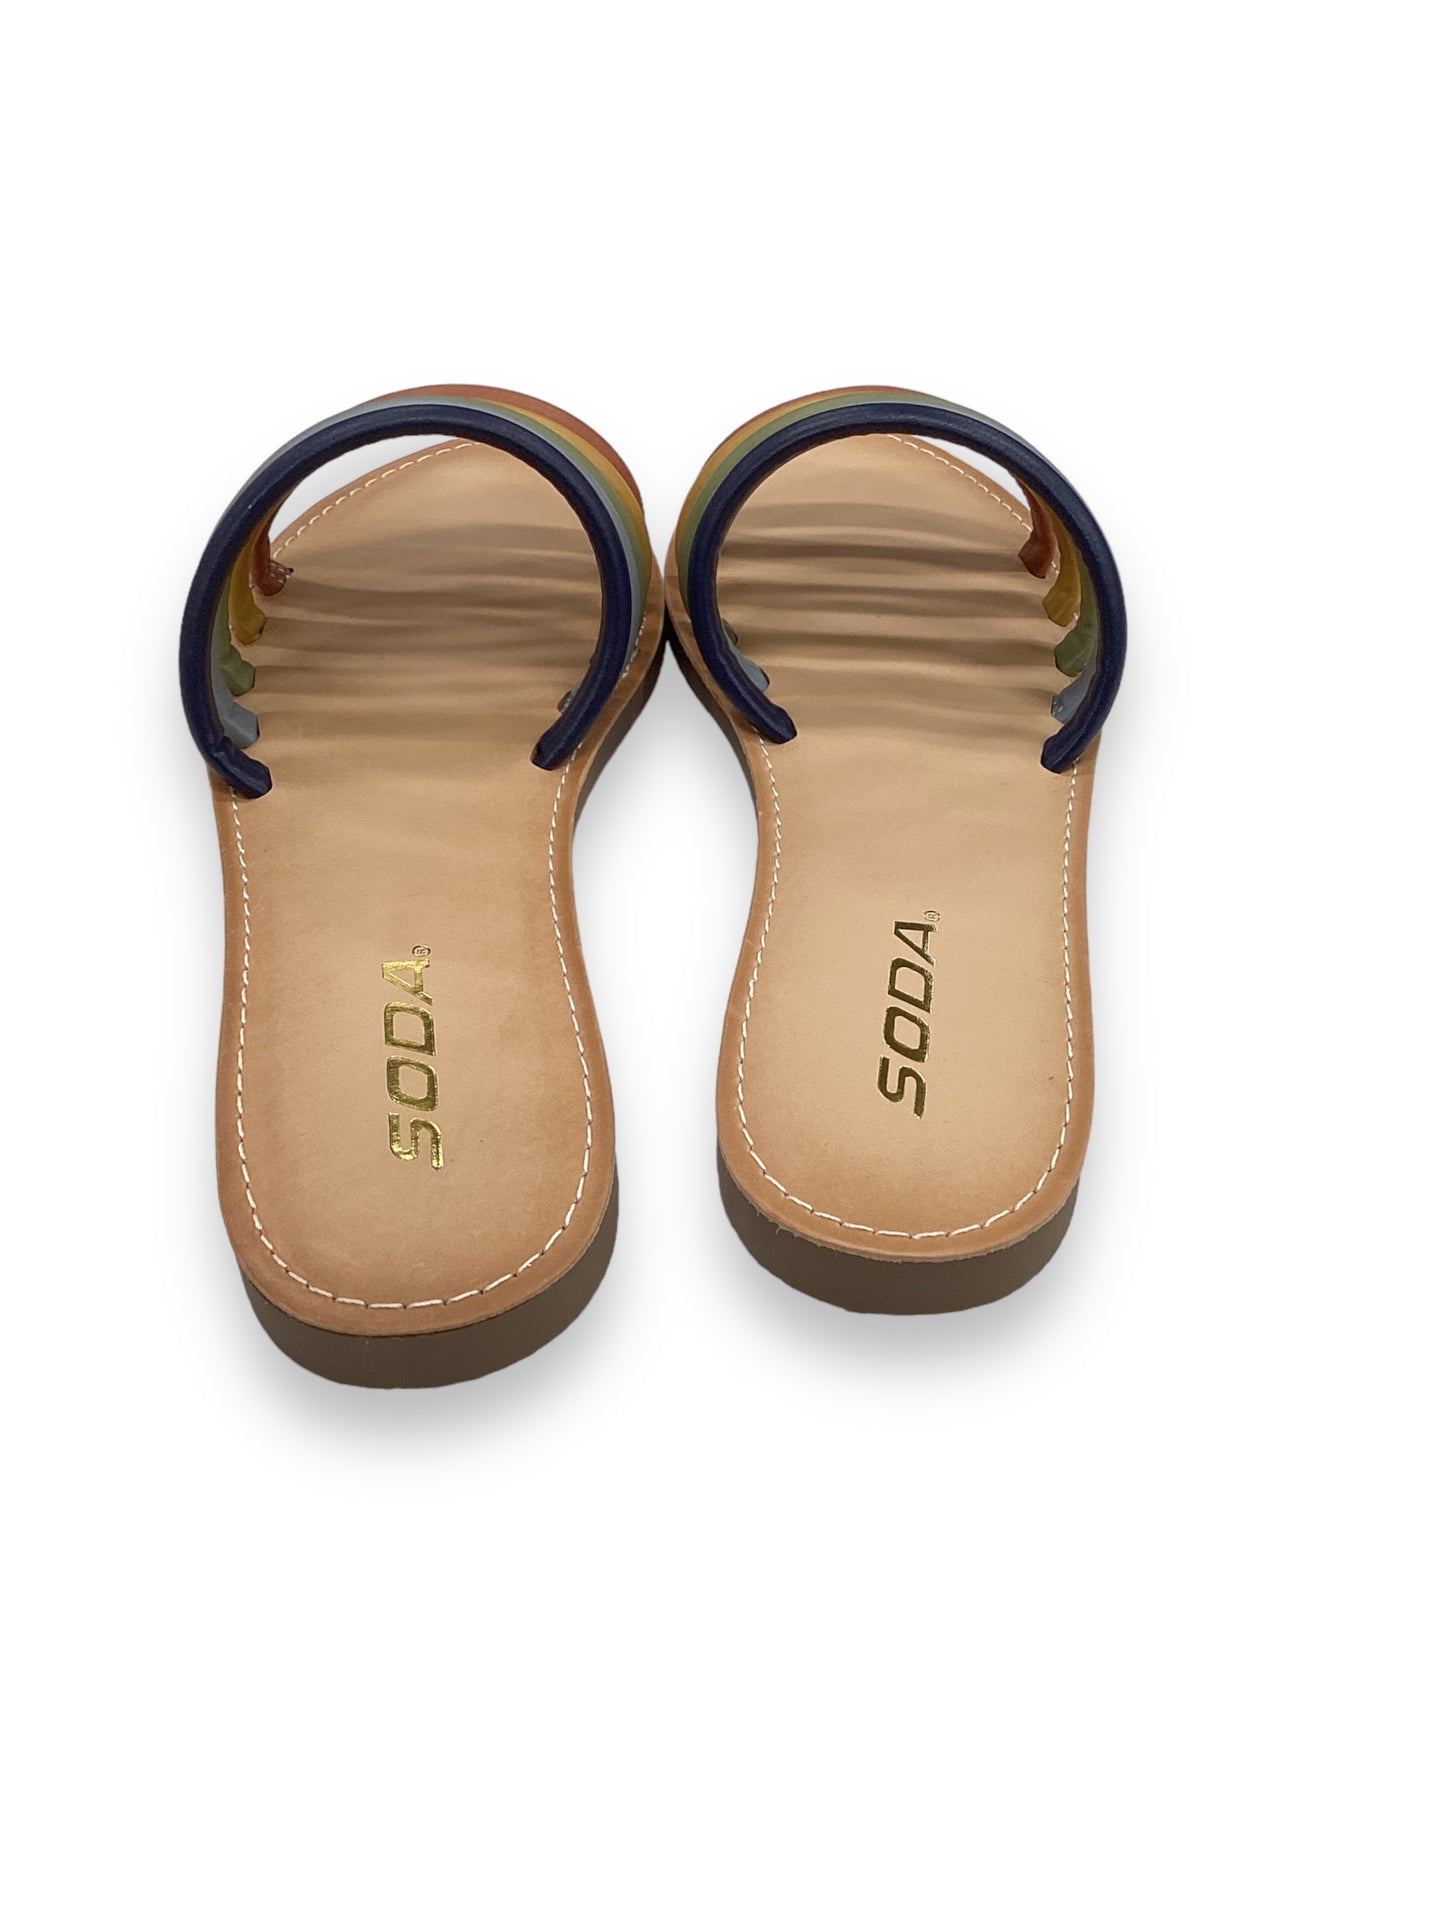 Sandals Flats By Soda  Size: 7.5